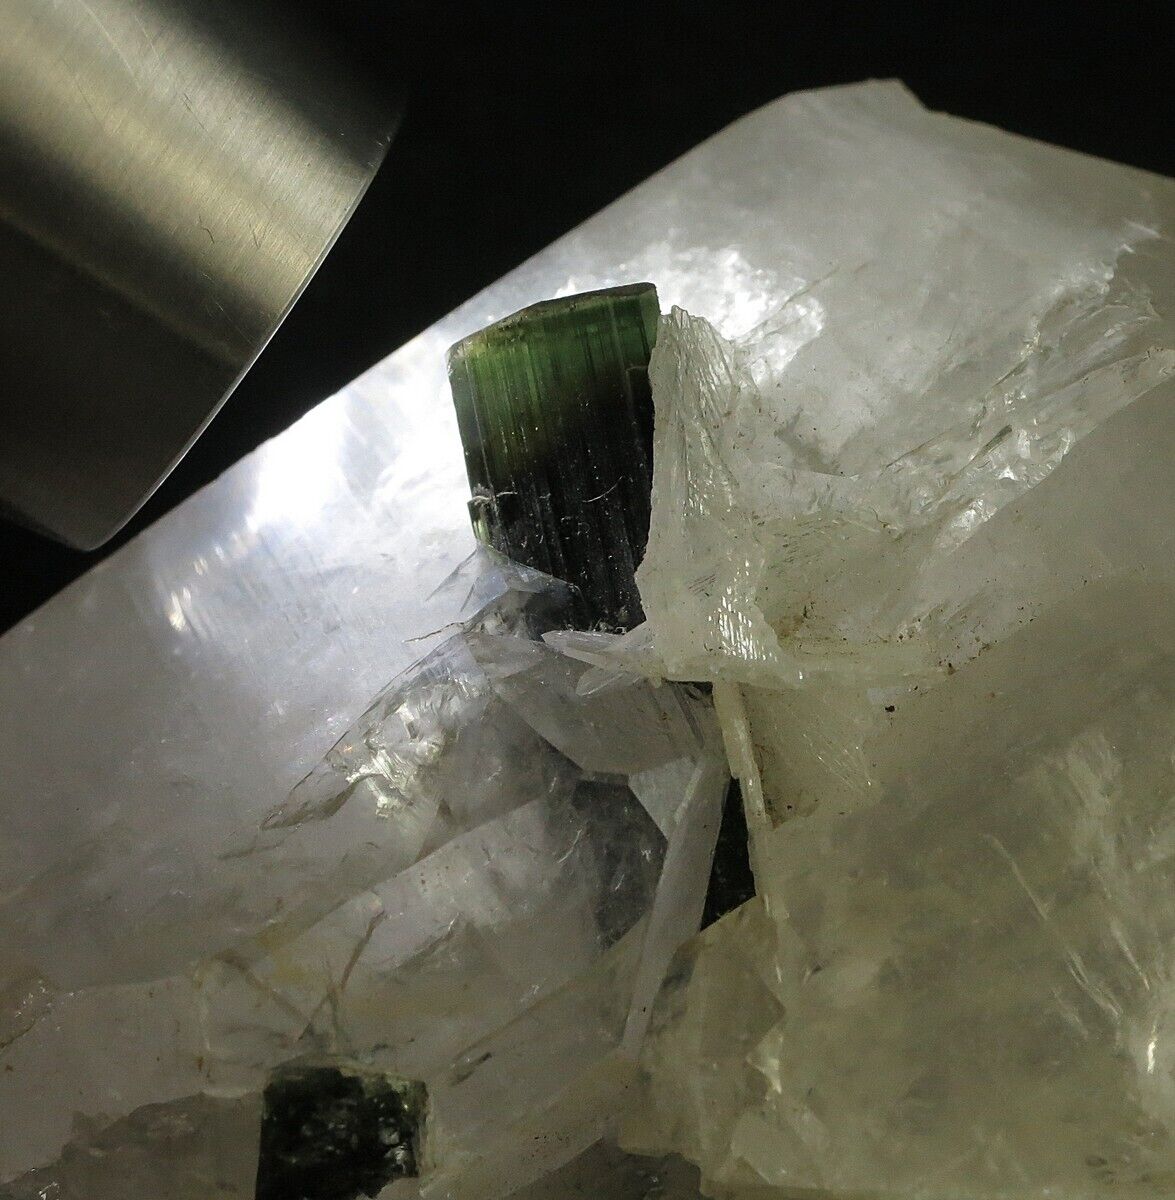 625 CARAT TERMINATED ZONING TOURMALINE CRYSTAL GROWING OUT OF QUARTZ CRYSTAL